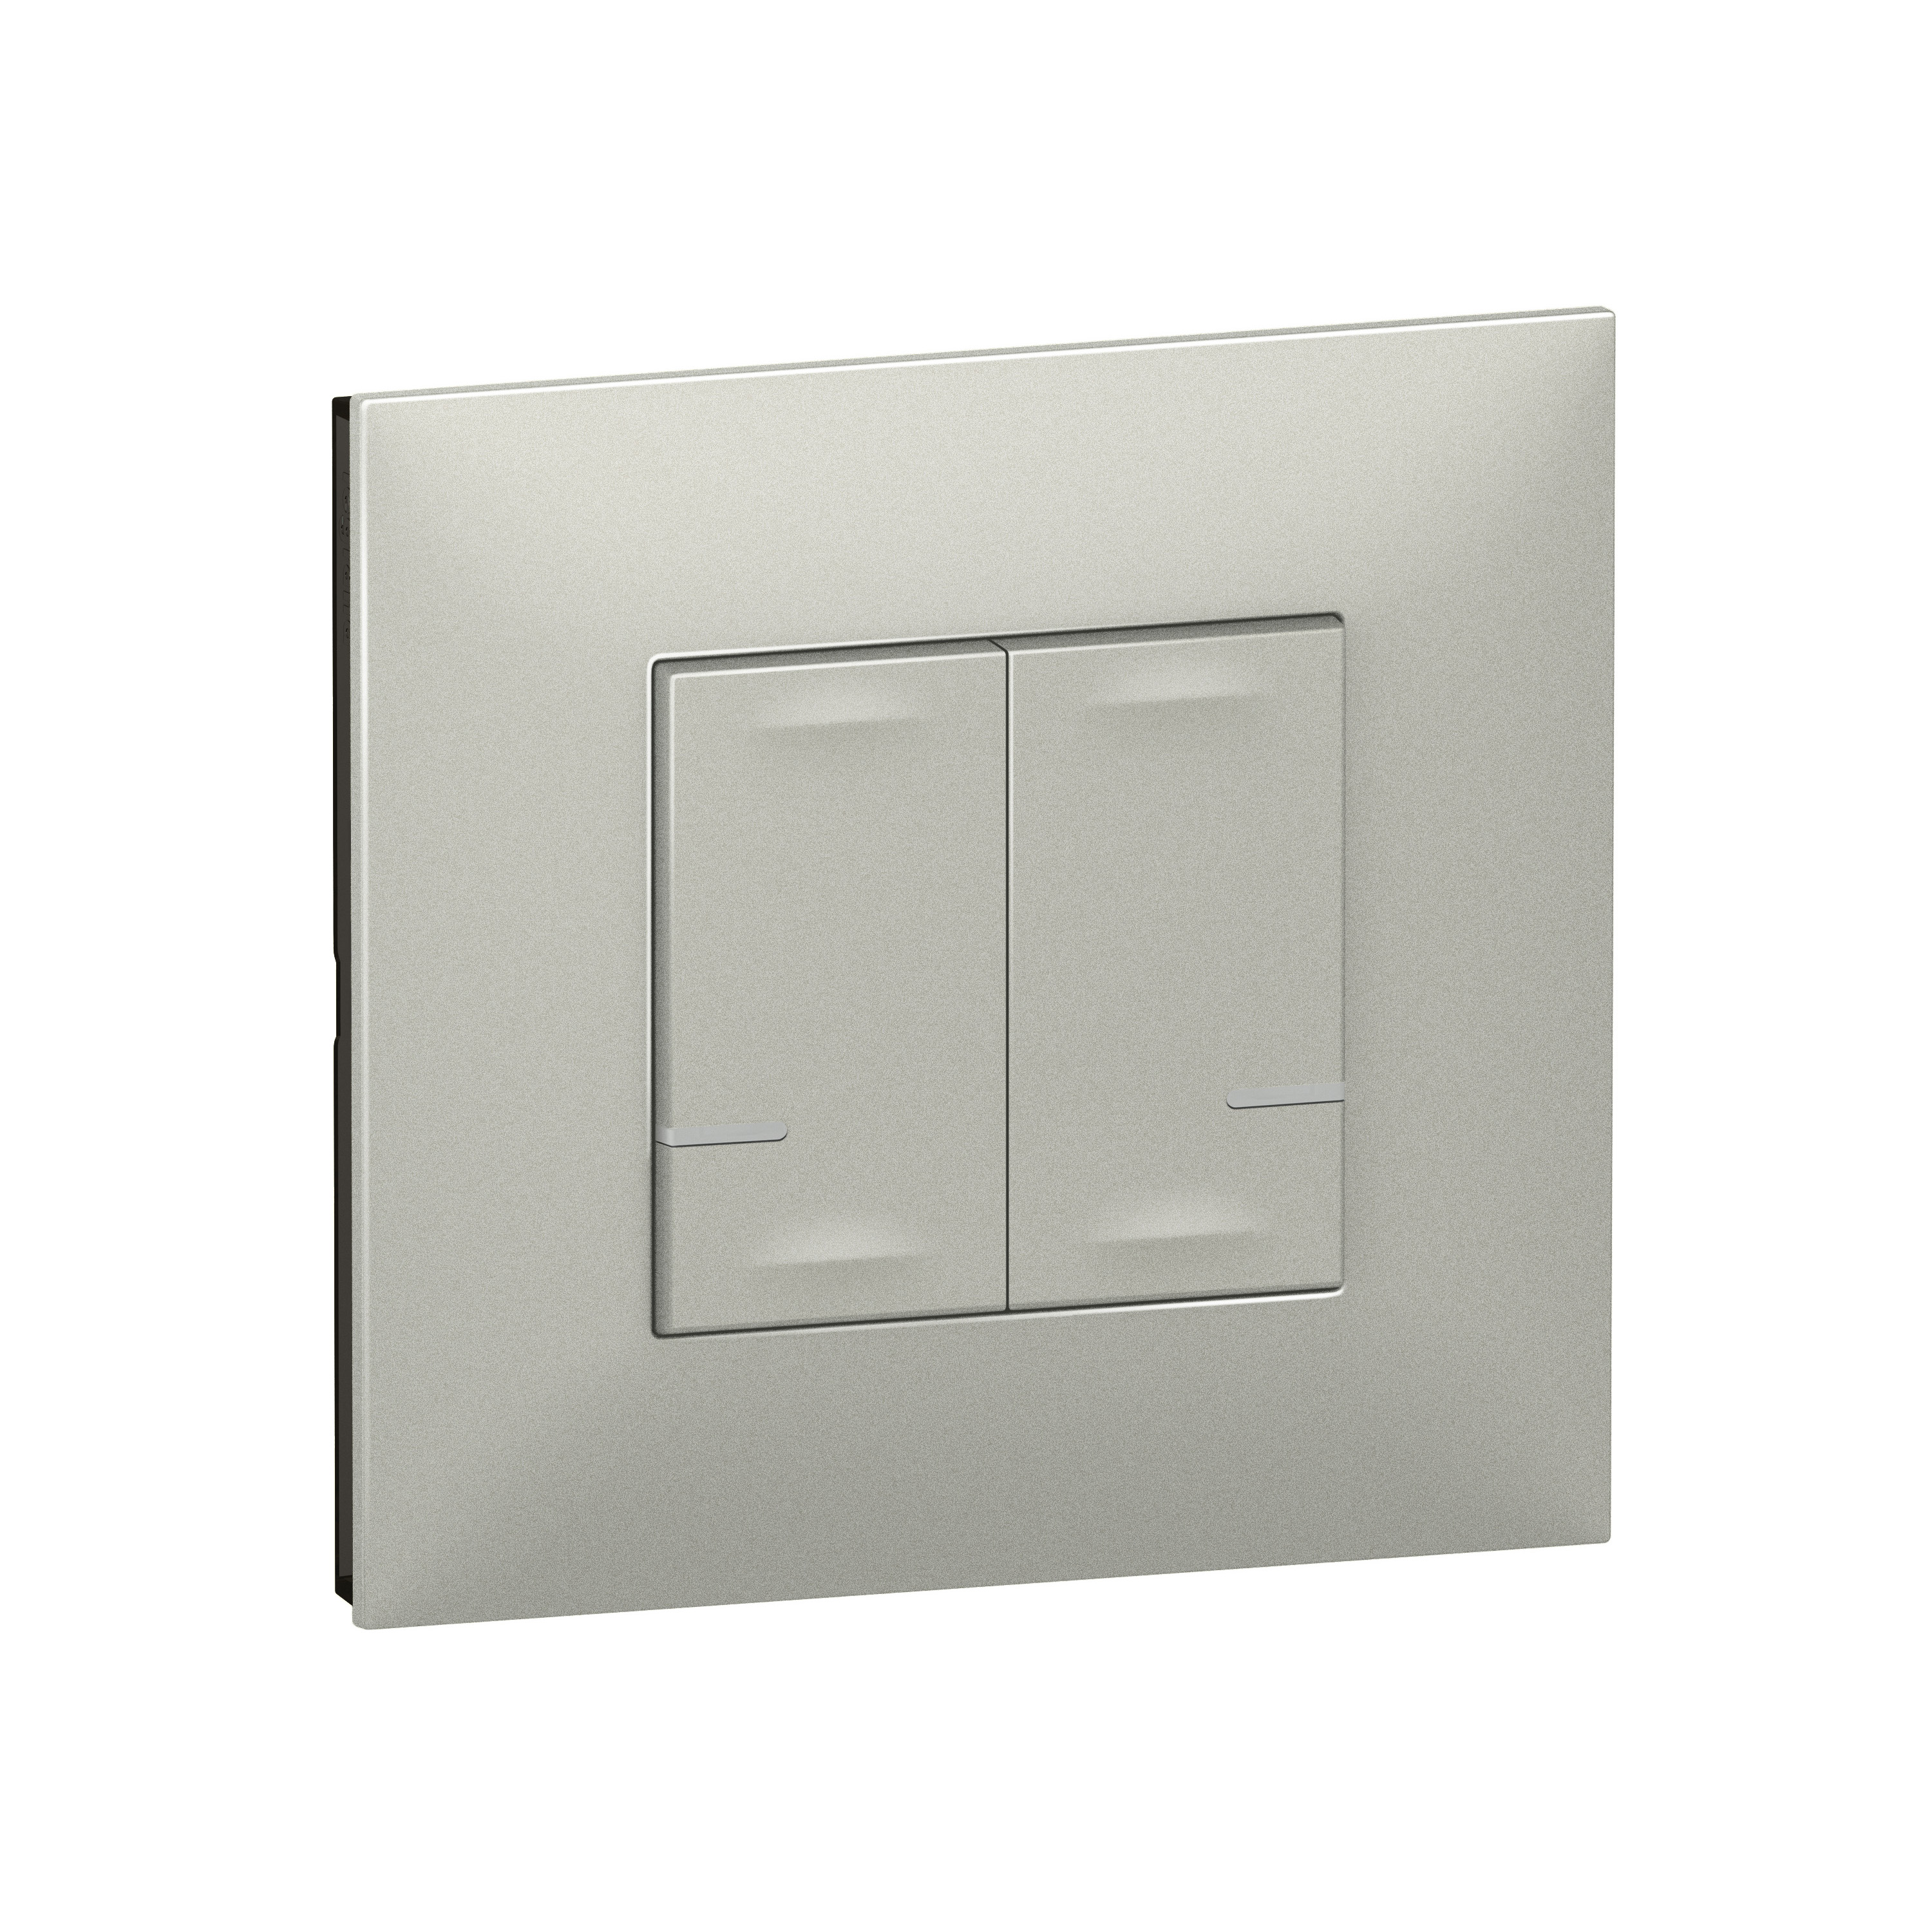 Connected light switch with neutral 2-gang 2x250w Valena Next alu 